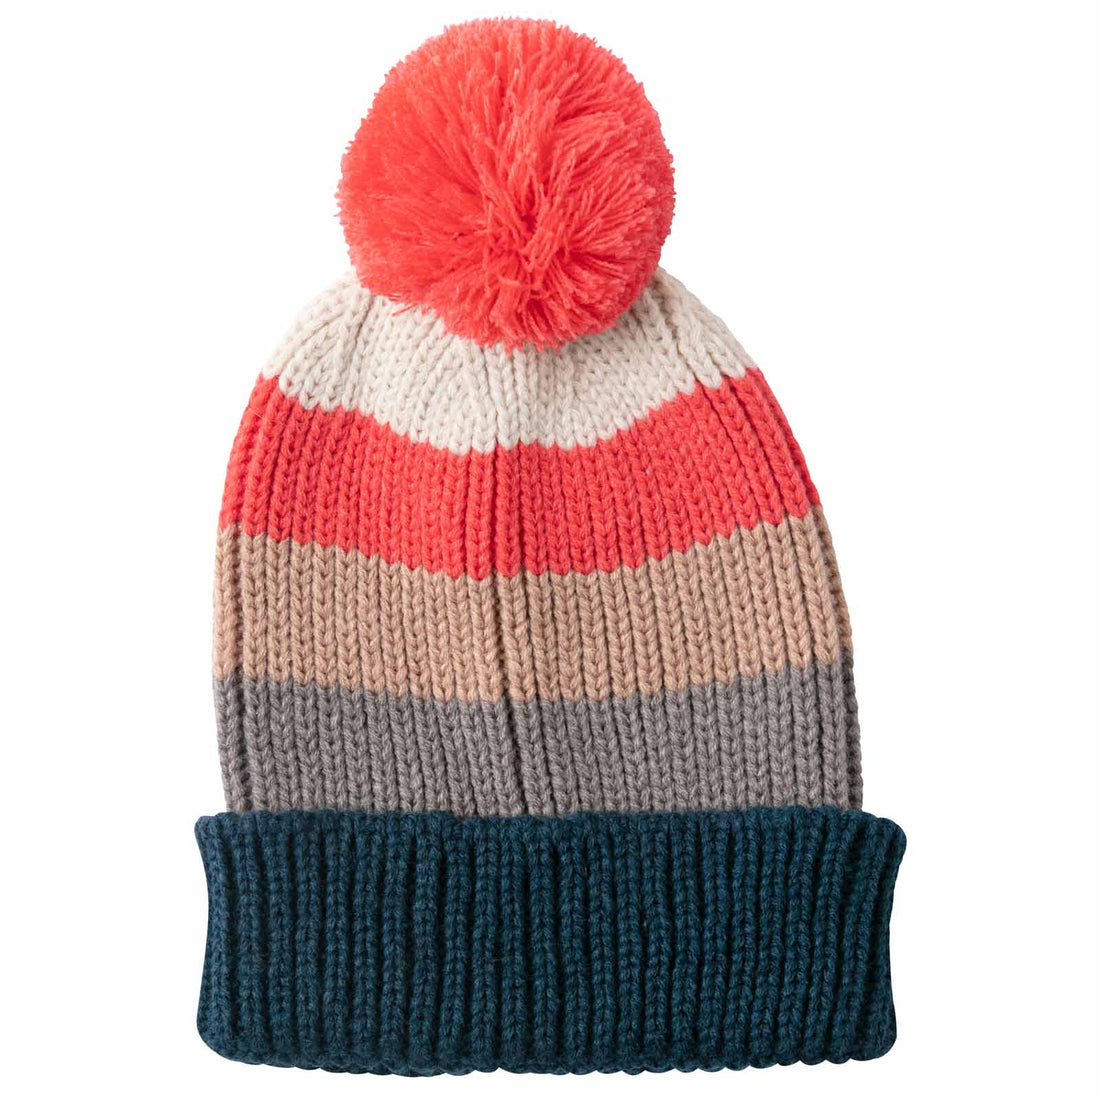 Warm Piccadilly Striped Pink and Tan Knit Beanie Hat - rockflowerpaper